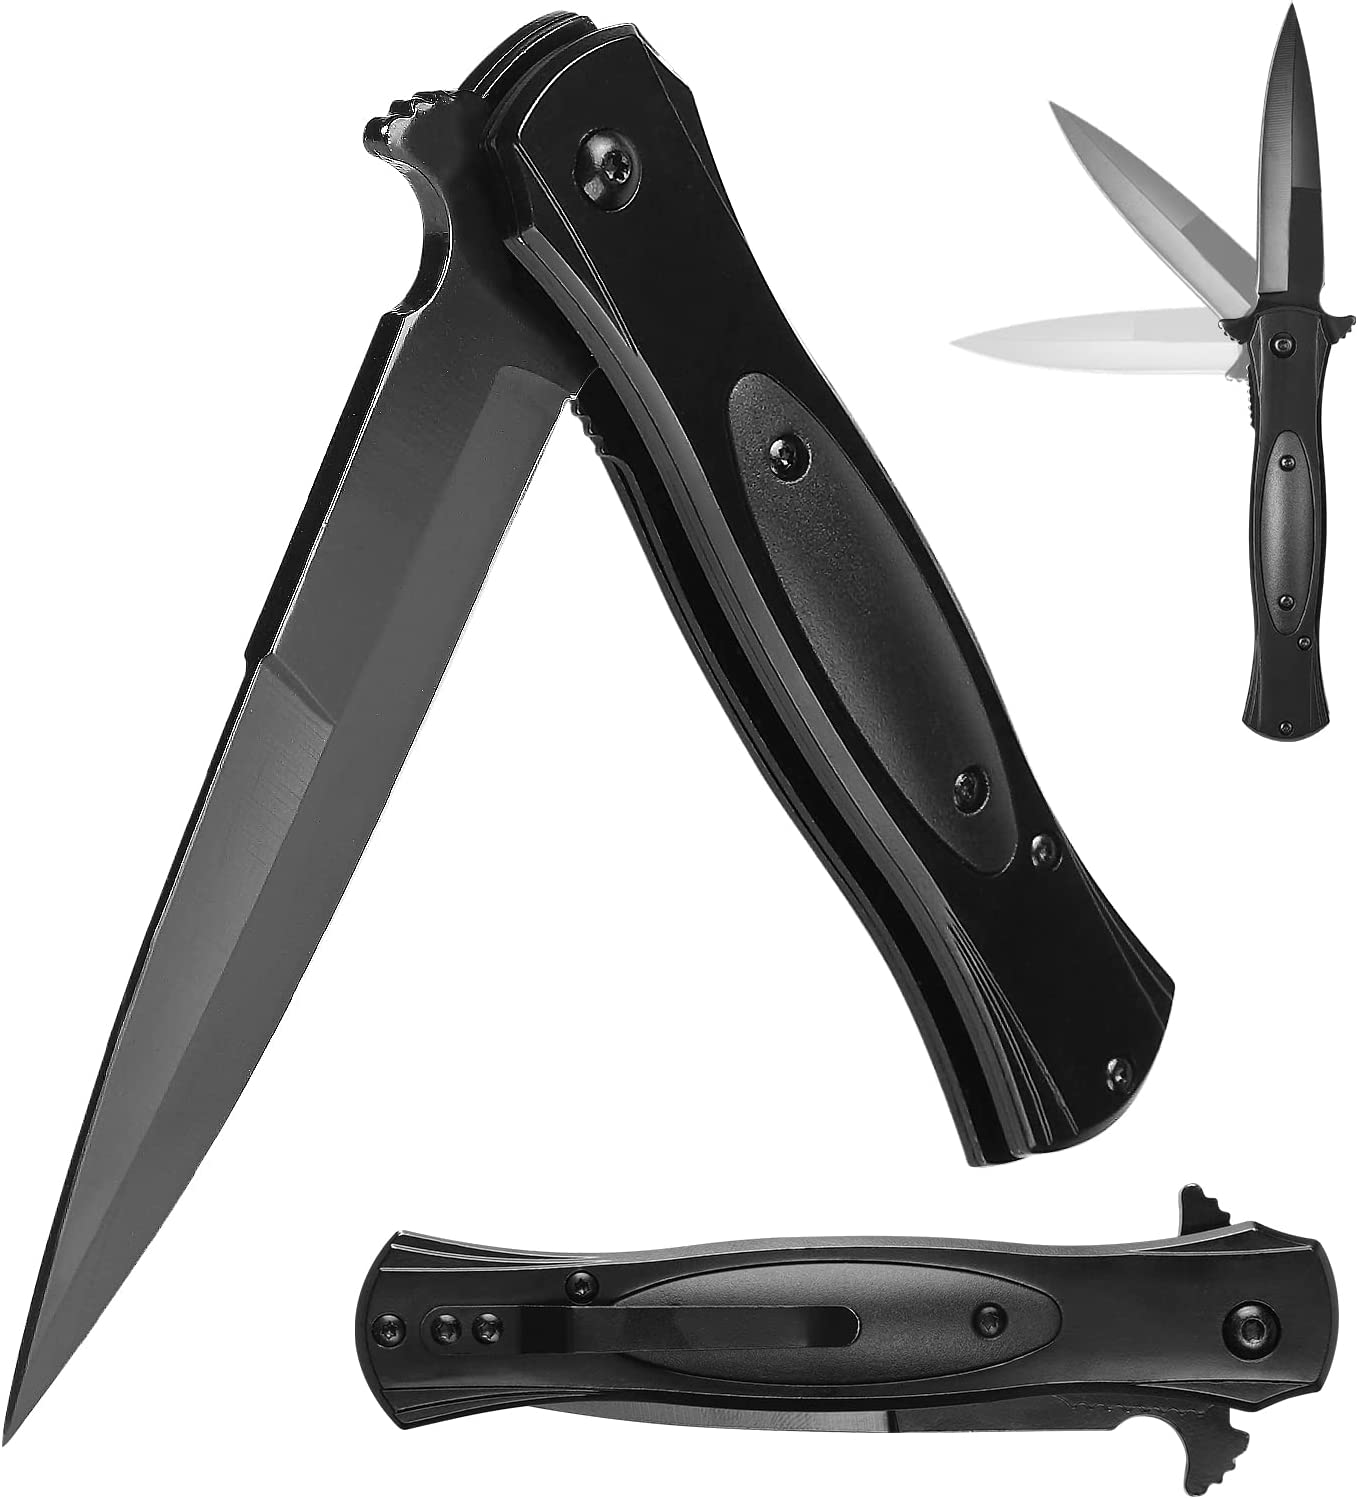 Tops Home EDC Pocket Knife with Clip for Everyday Carry, Cool Knives for Men Women for Outdoor Survival Camping Hiking Fishing (Black) (Black)